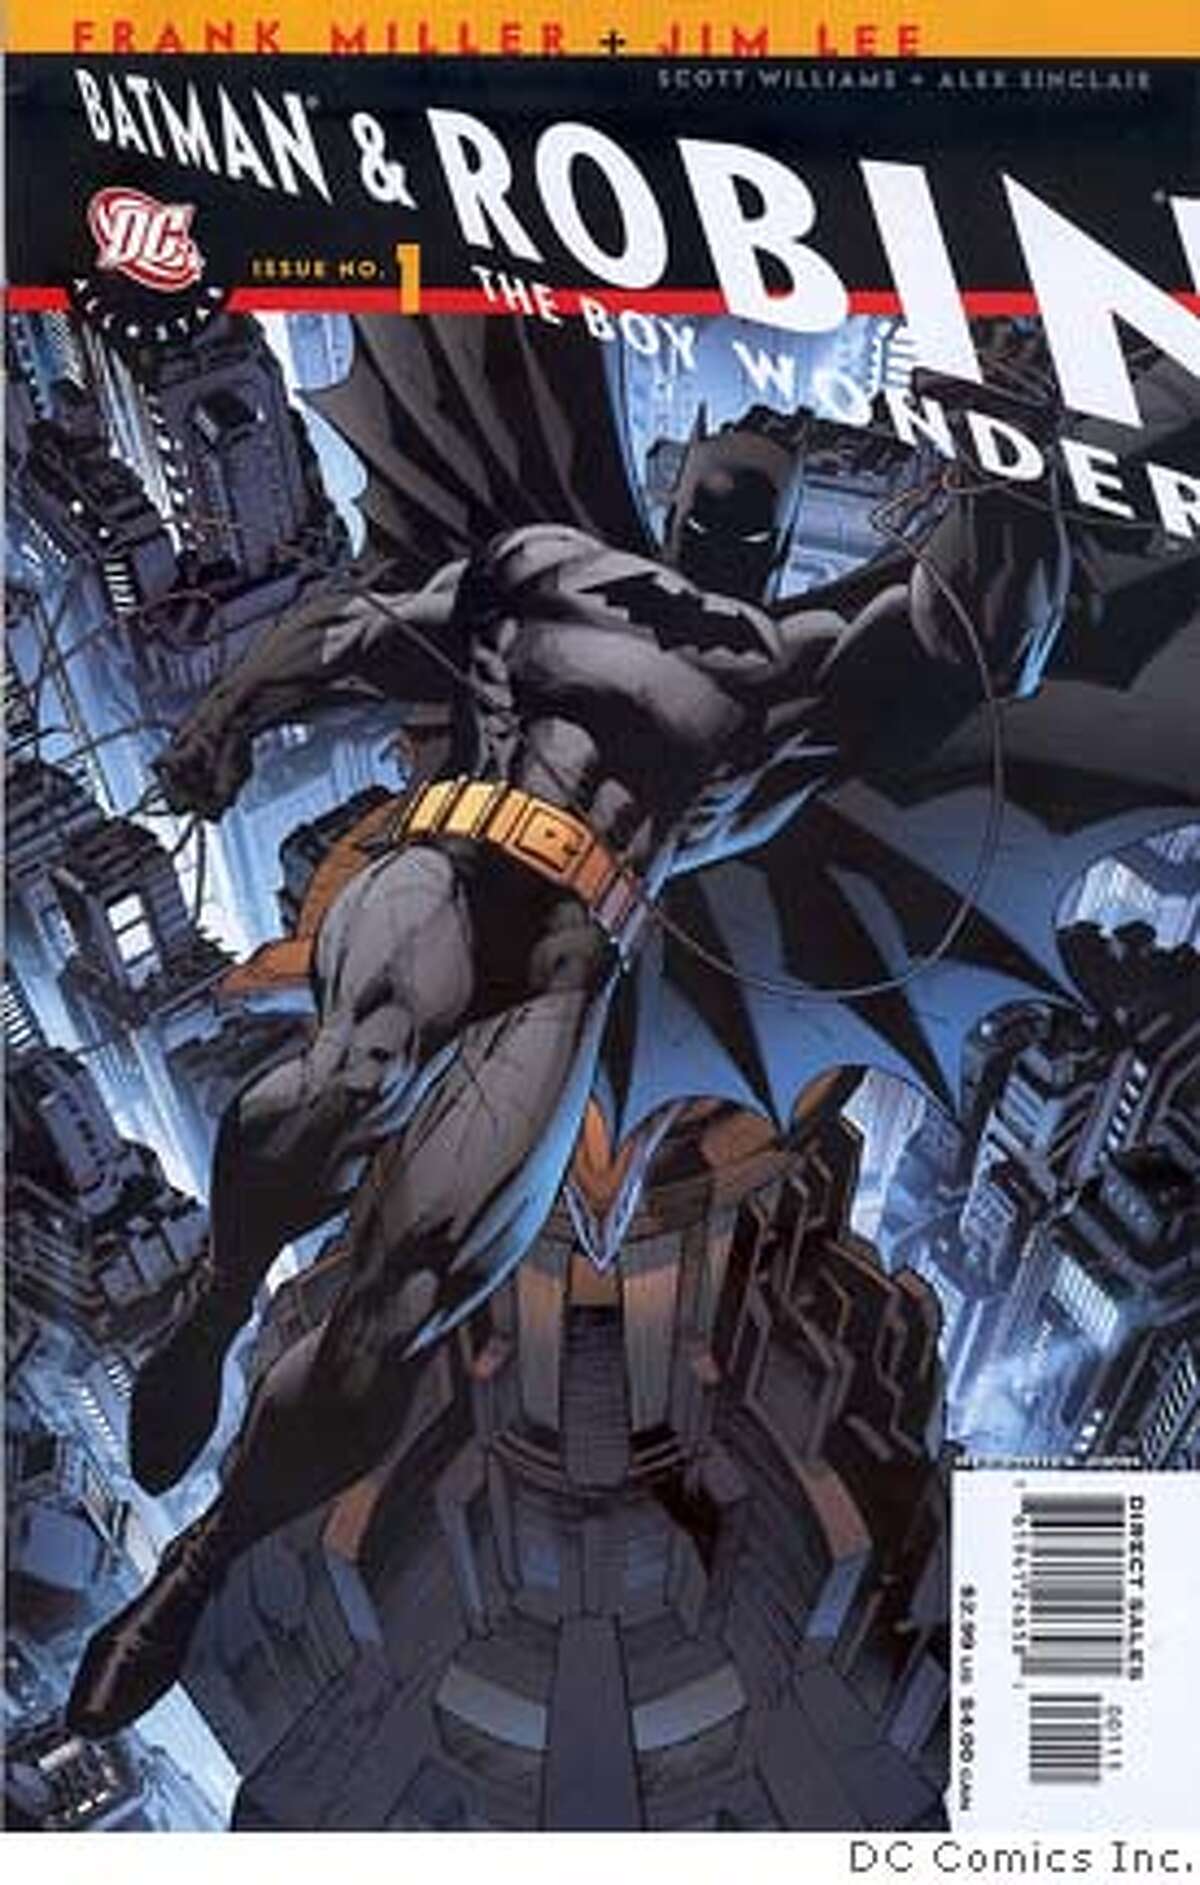 SH06A213COMICS Jan. 24, 2006 _ "All Star Batman and Robin the Boy Wonder" No. 1, by Frank Miller ("Sin City") and Jim Lee, was the top-selling book for Diamond Comics Distributors Inc. in 2005. (SHNS photo courtesy DC Comics Inc.)